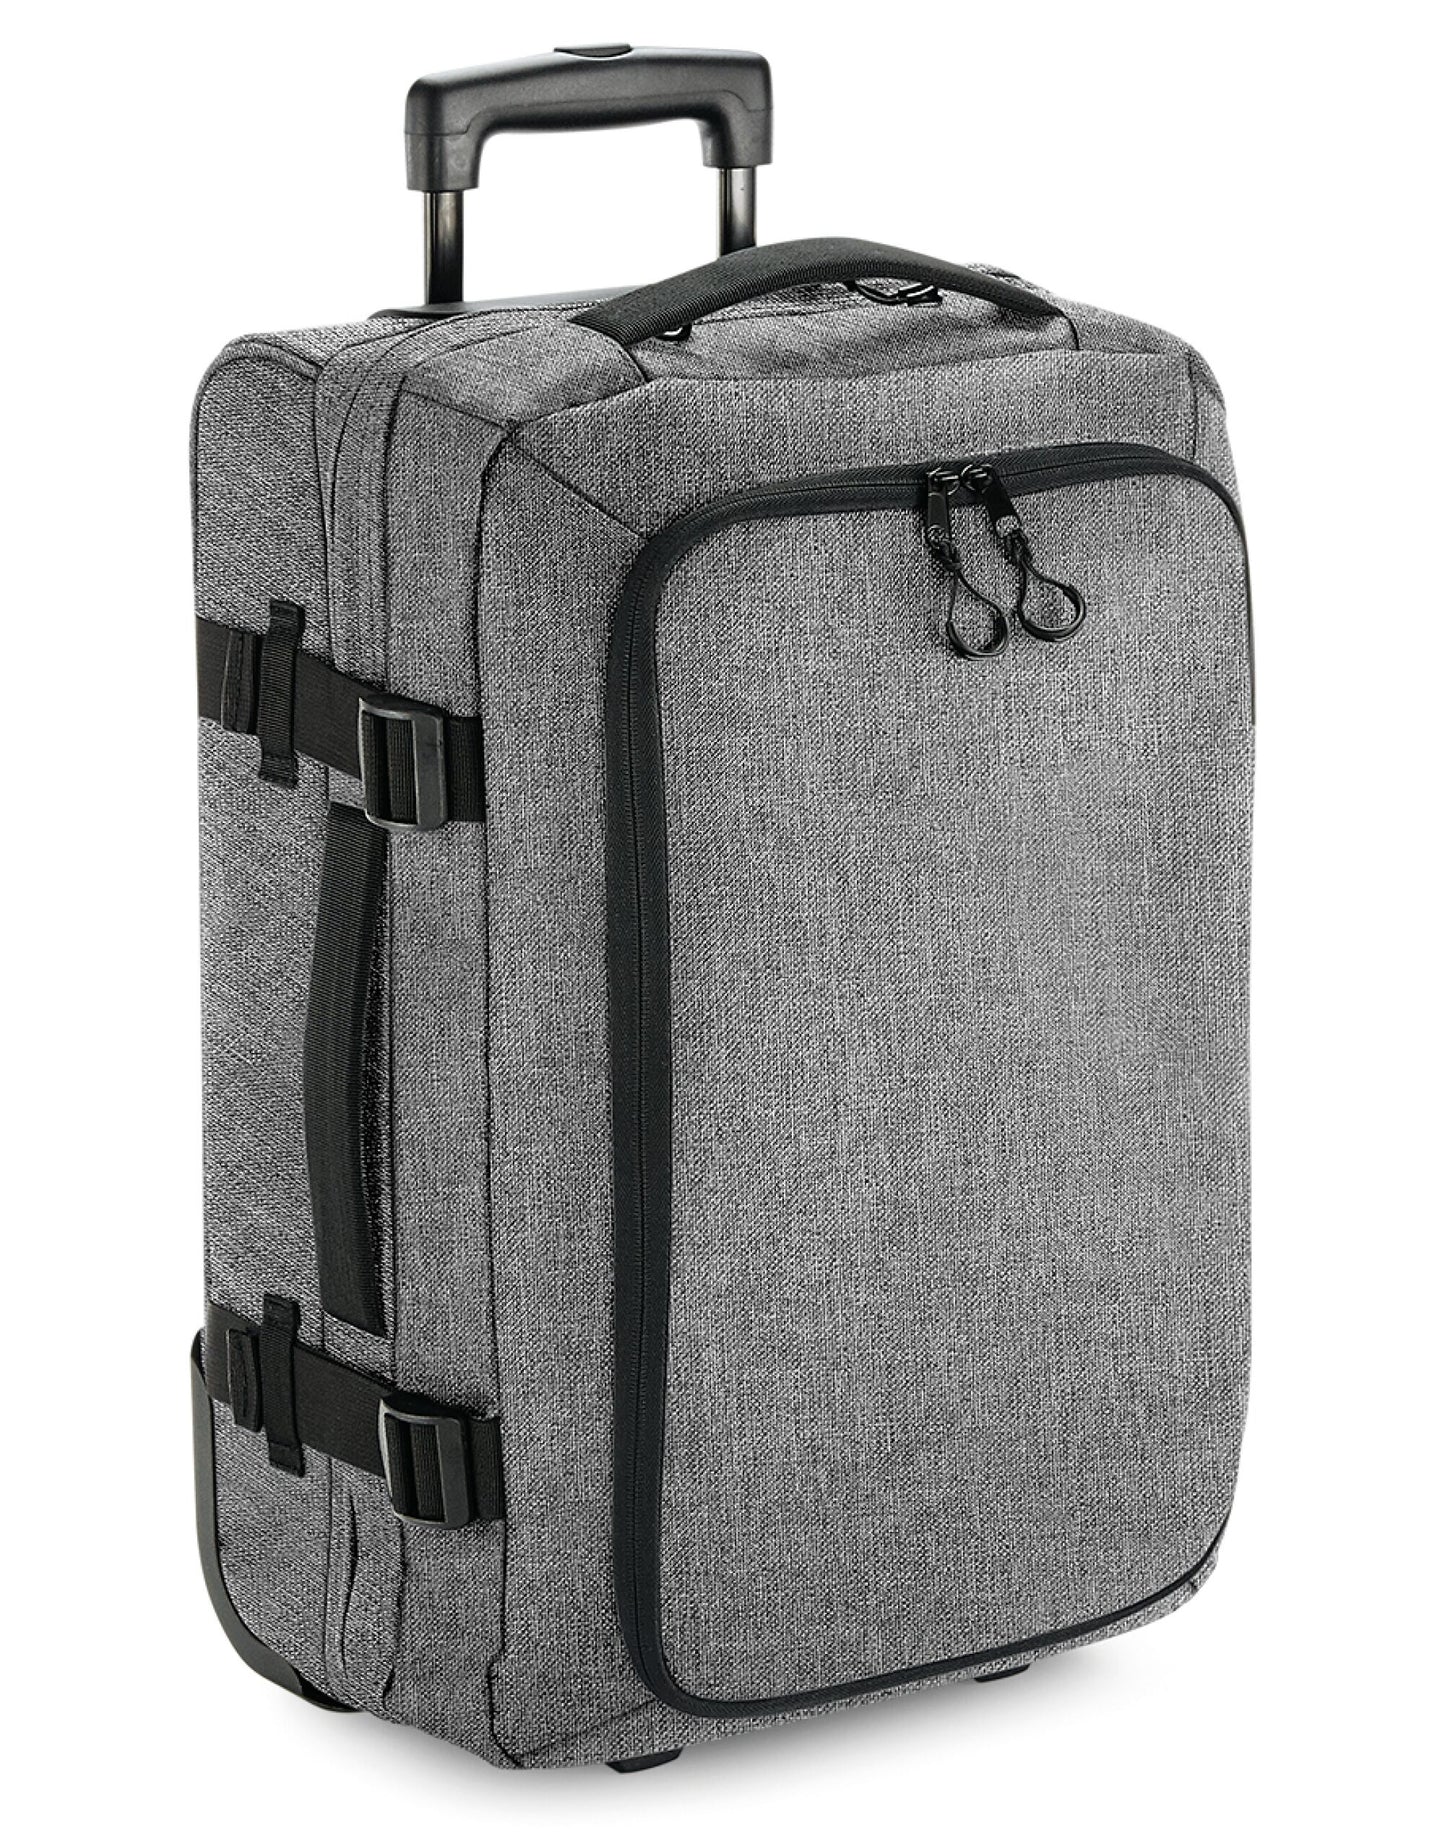 Bagbase Escape Carry-On Wheelie